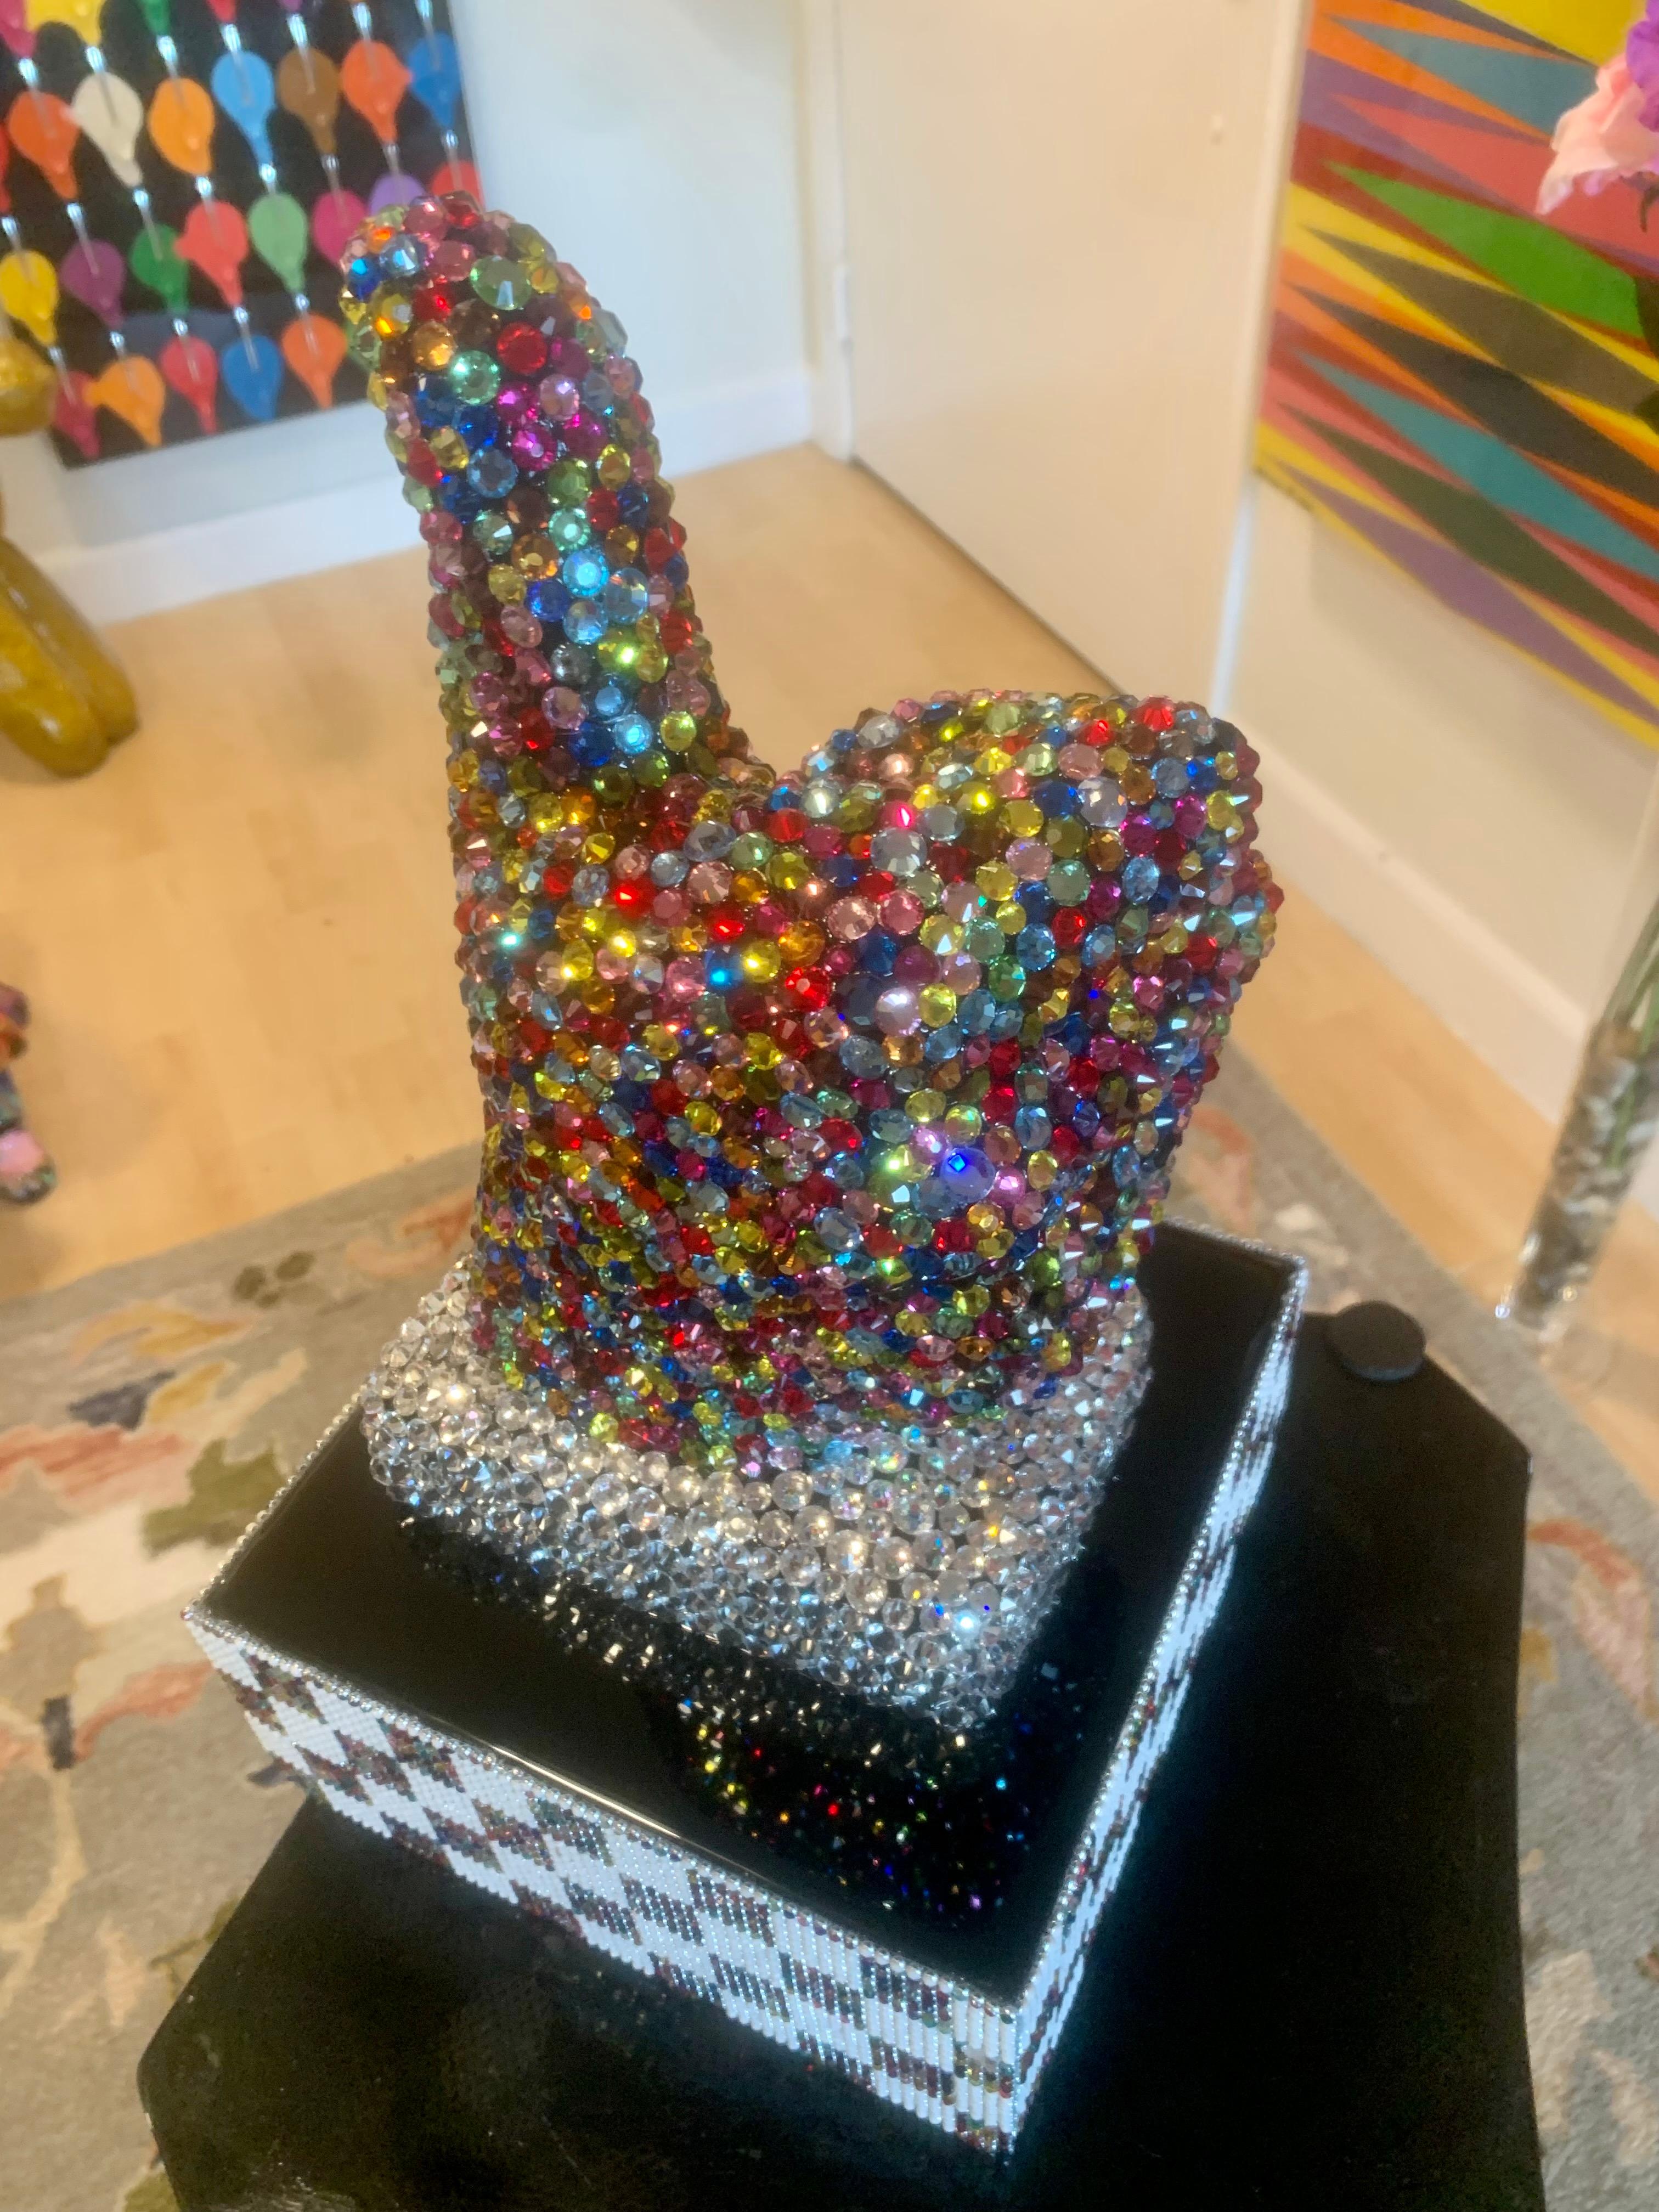 THUMBS UP FOR LIFE (One of a Kind Swarovski Mixed Media Sculpture) 4